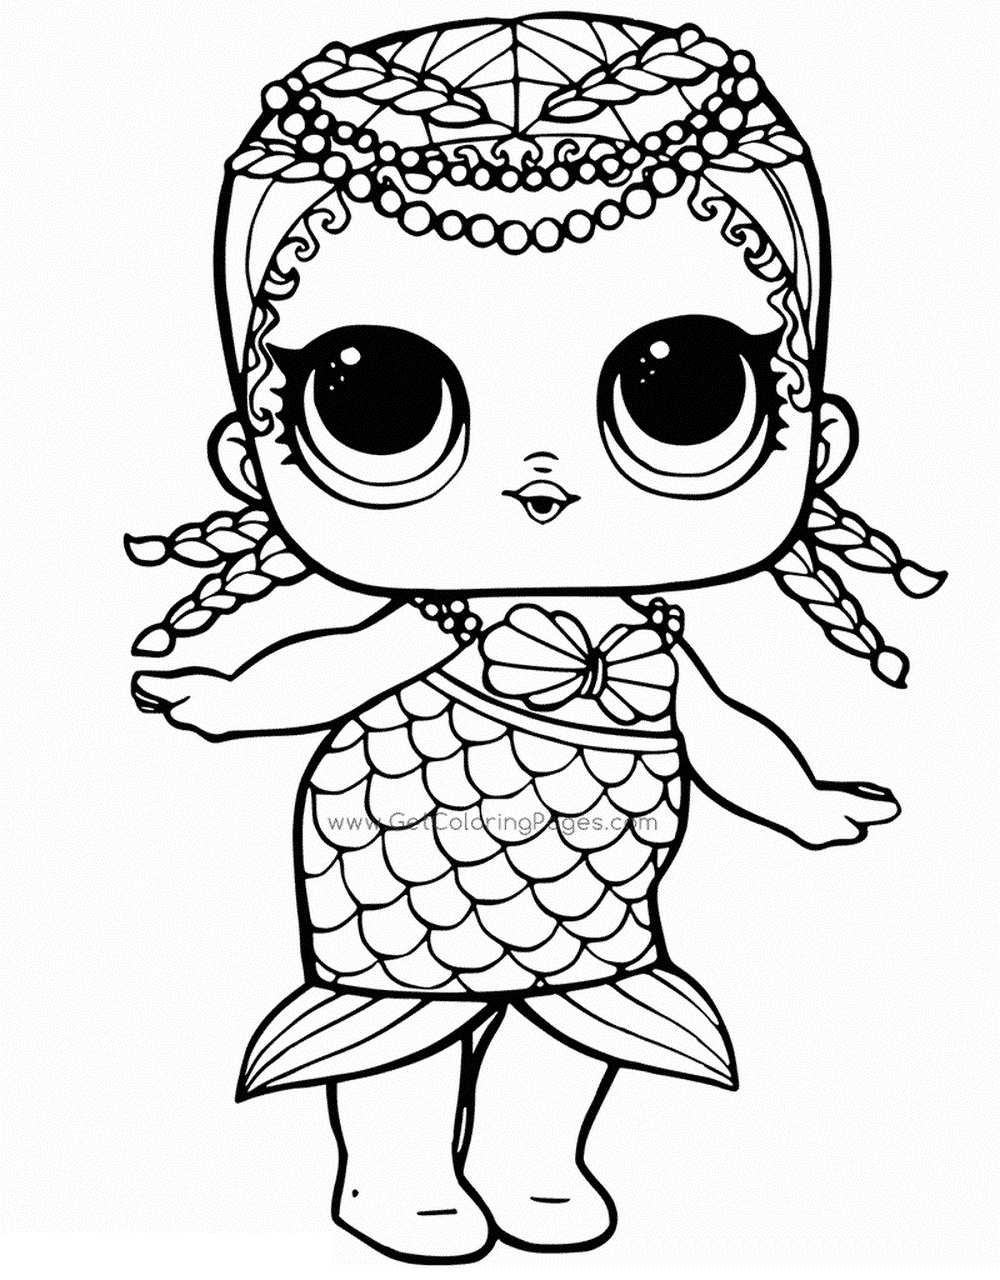 LOL Coloring Pages FREE Printable 120